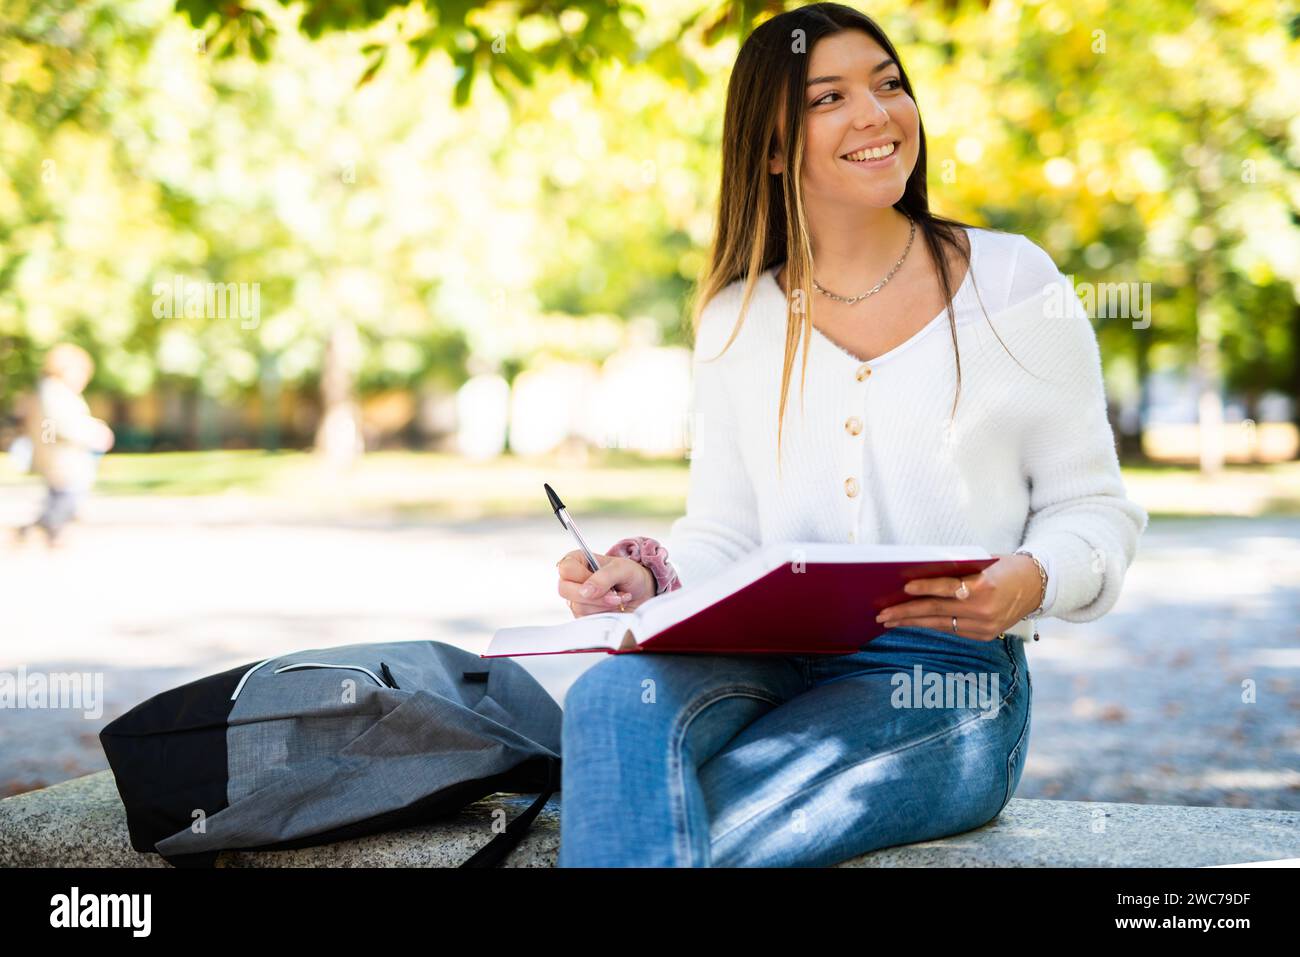 Beautiful female college student reading a book on a bench in a park Stock Photo